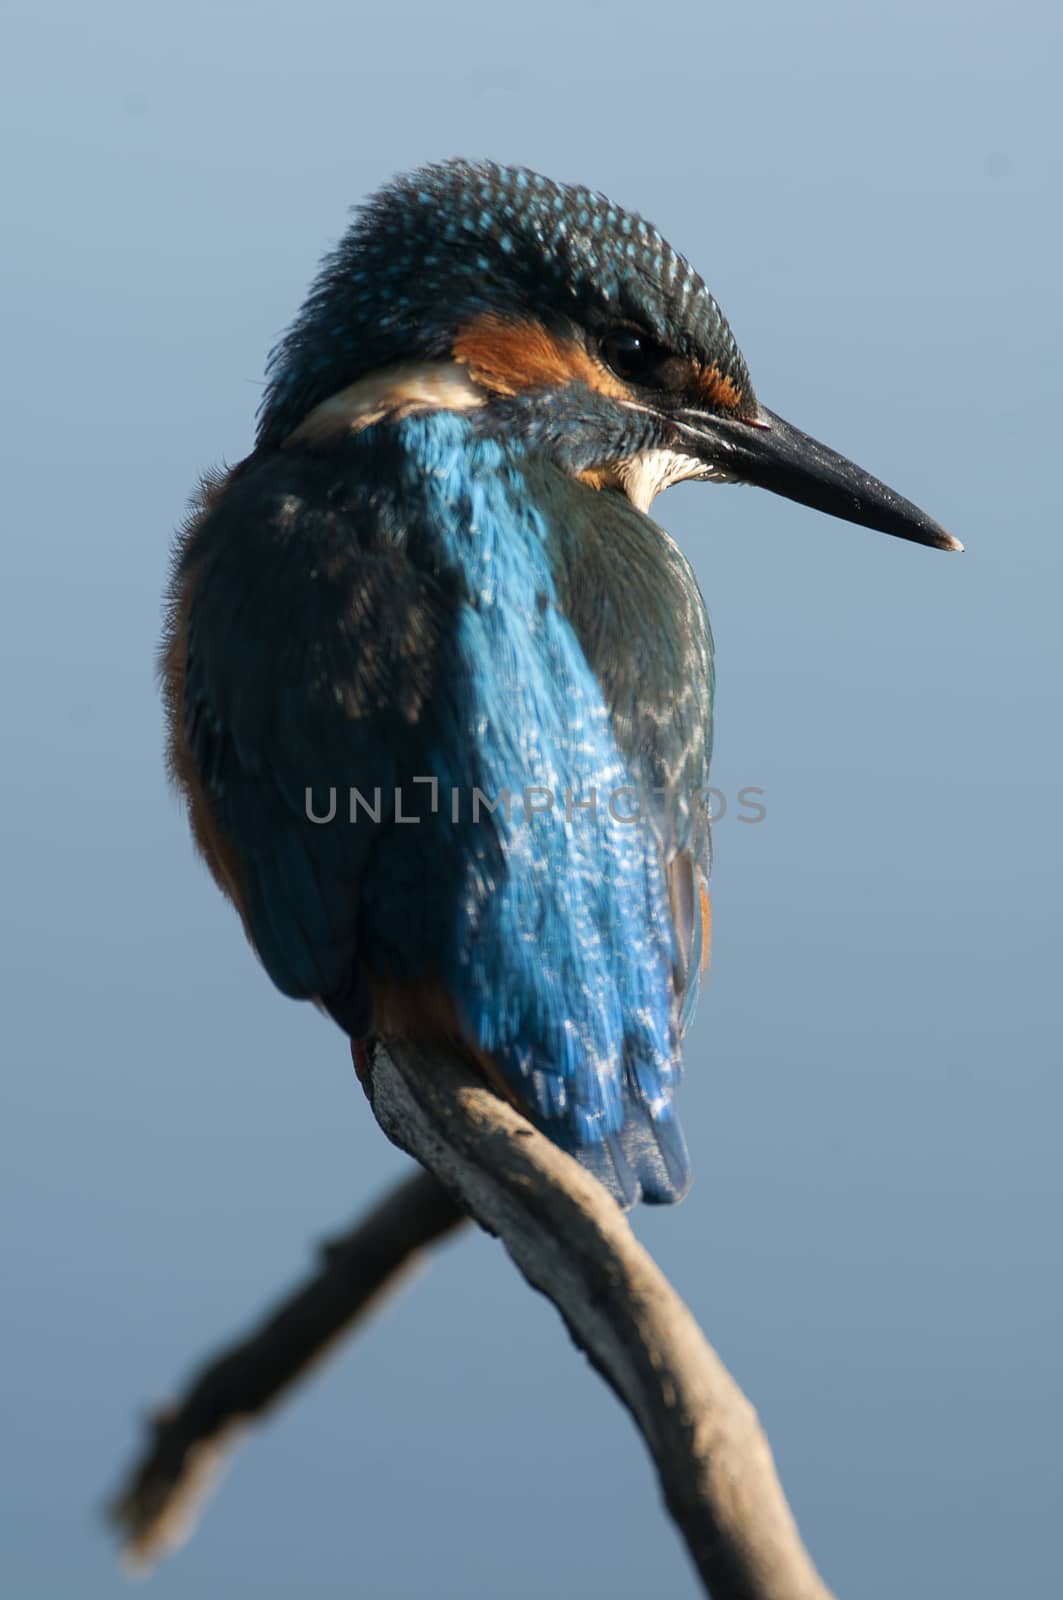 Kingfisher (Alcedo atthis) perched